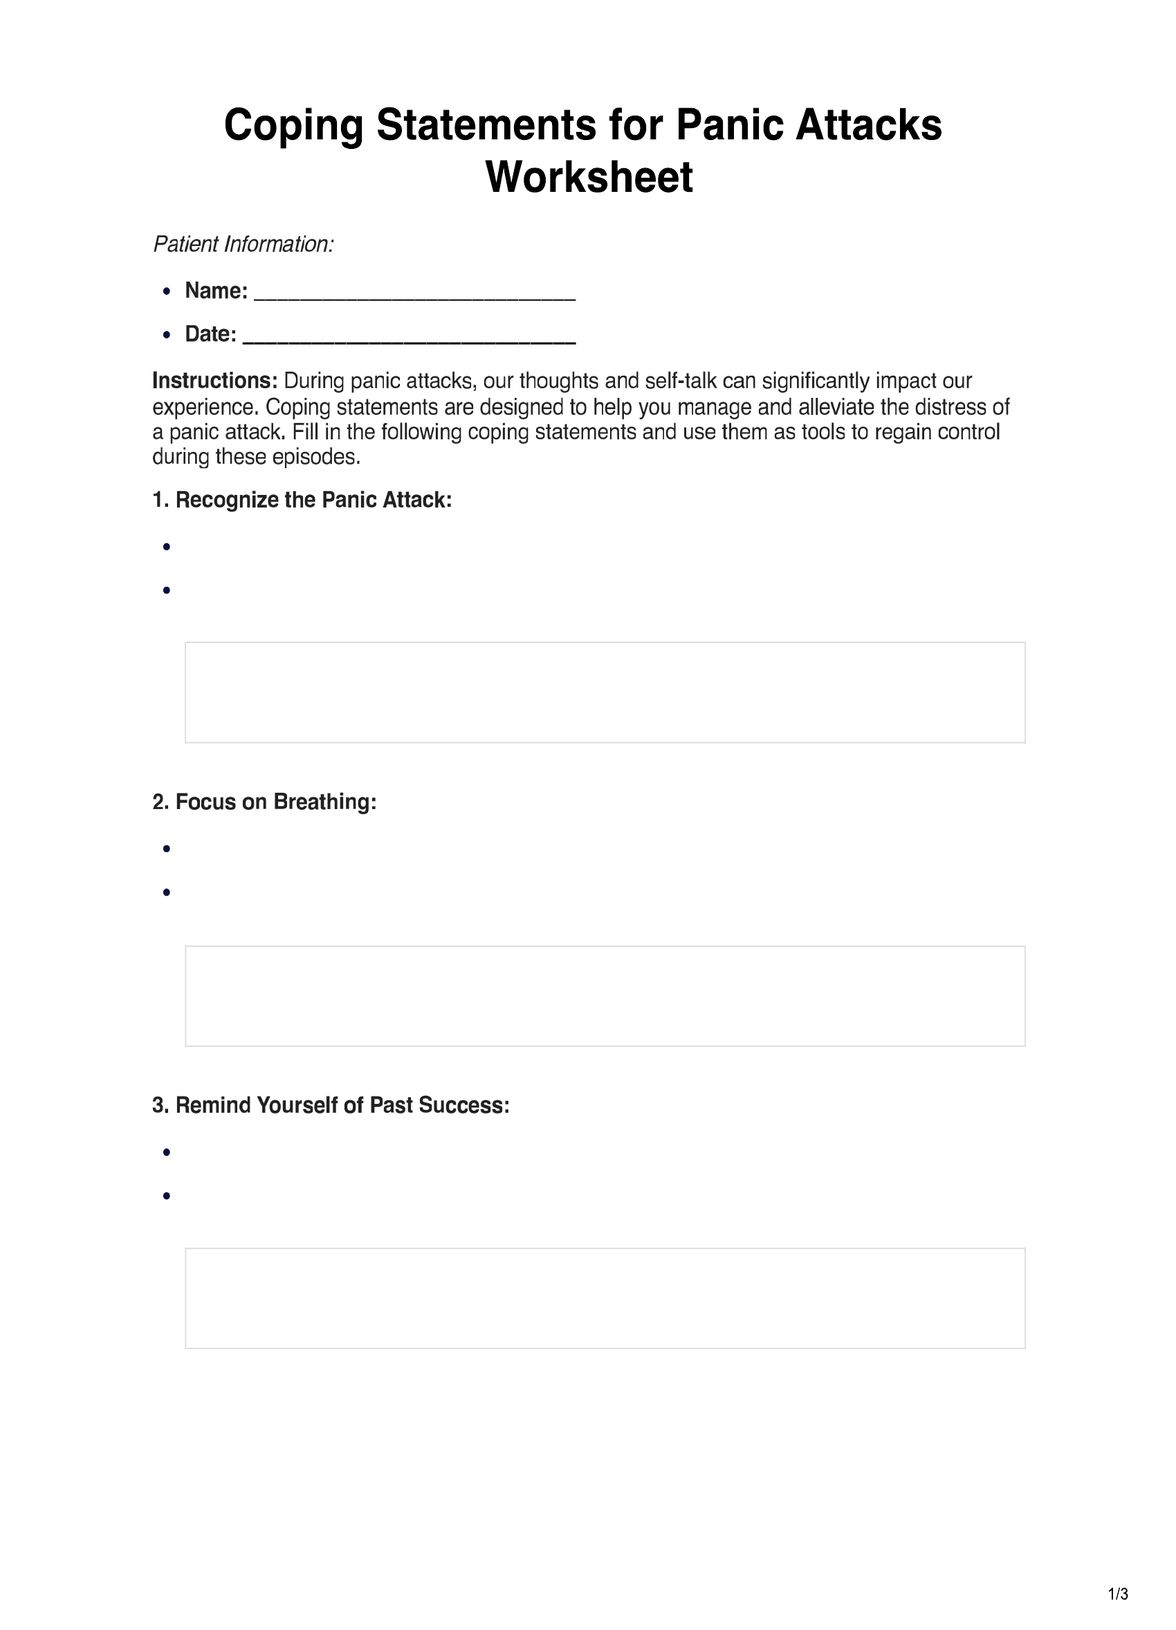 Coping Statements for Panic Attacks Worksheet PDF Example